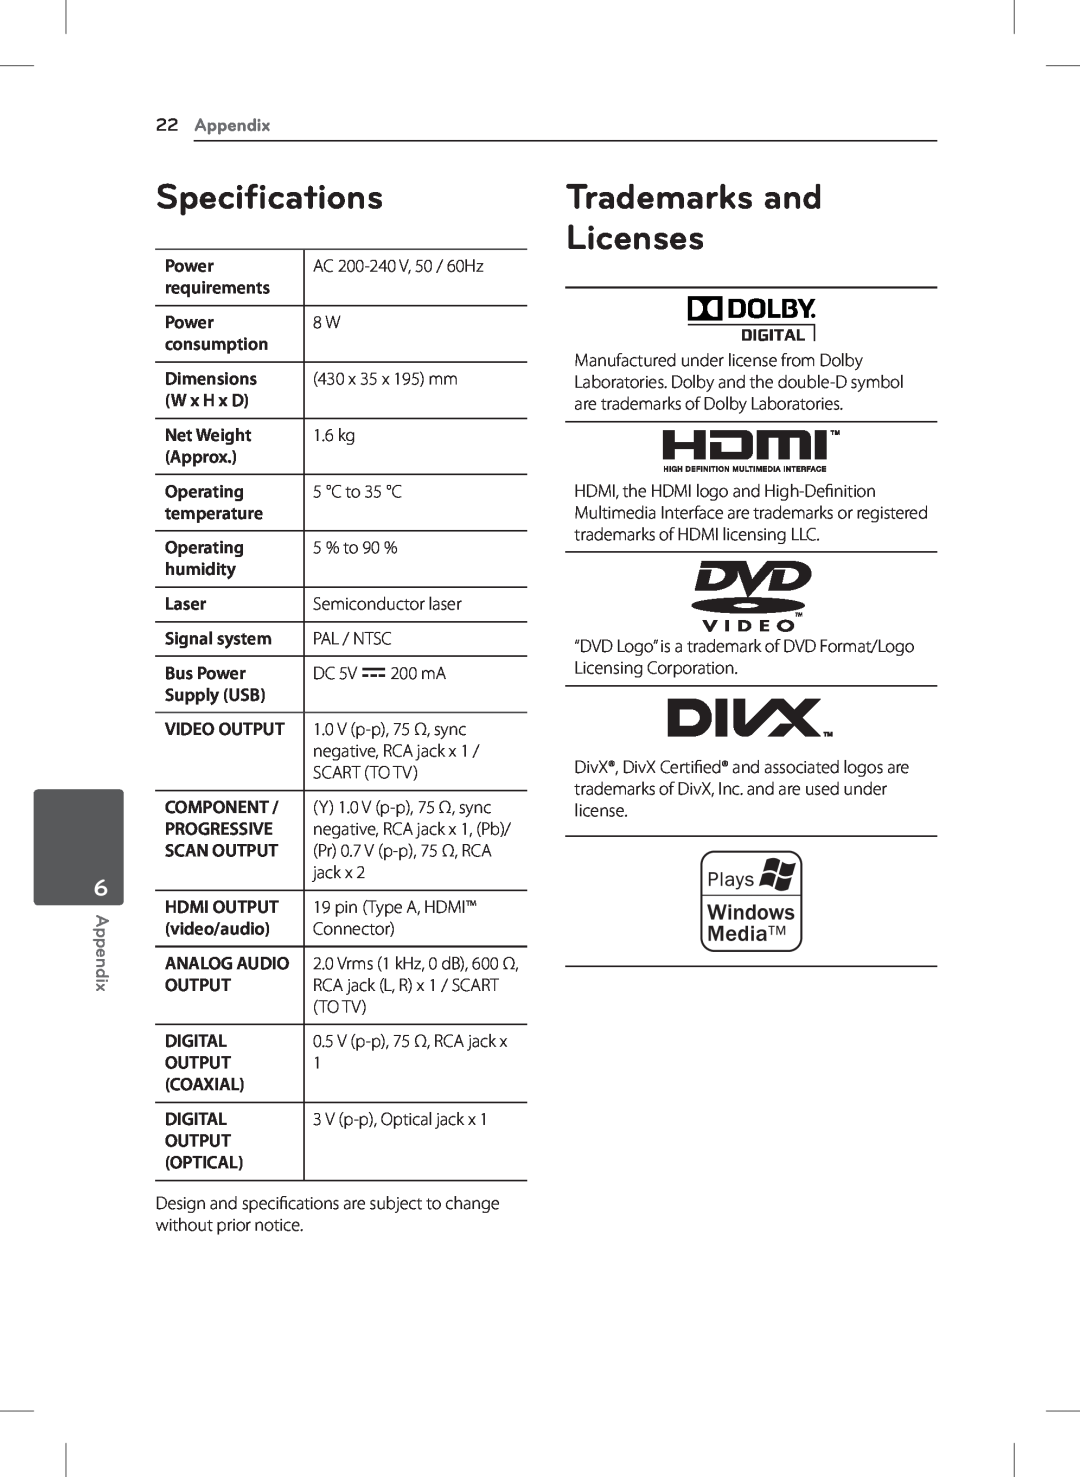 LG Electronics DVX692H owner manual Specifications, Trademarks and Licenses, Appendix 